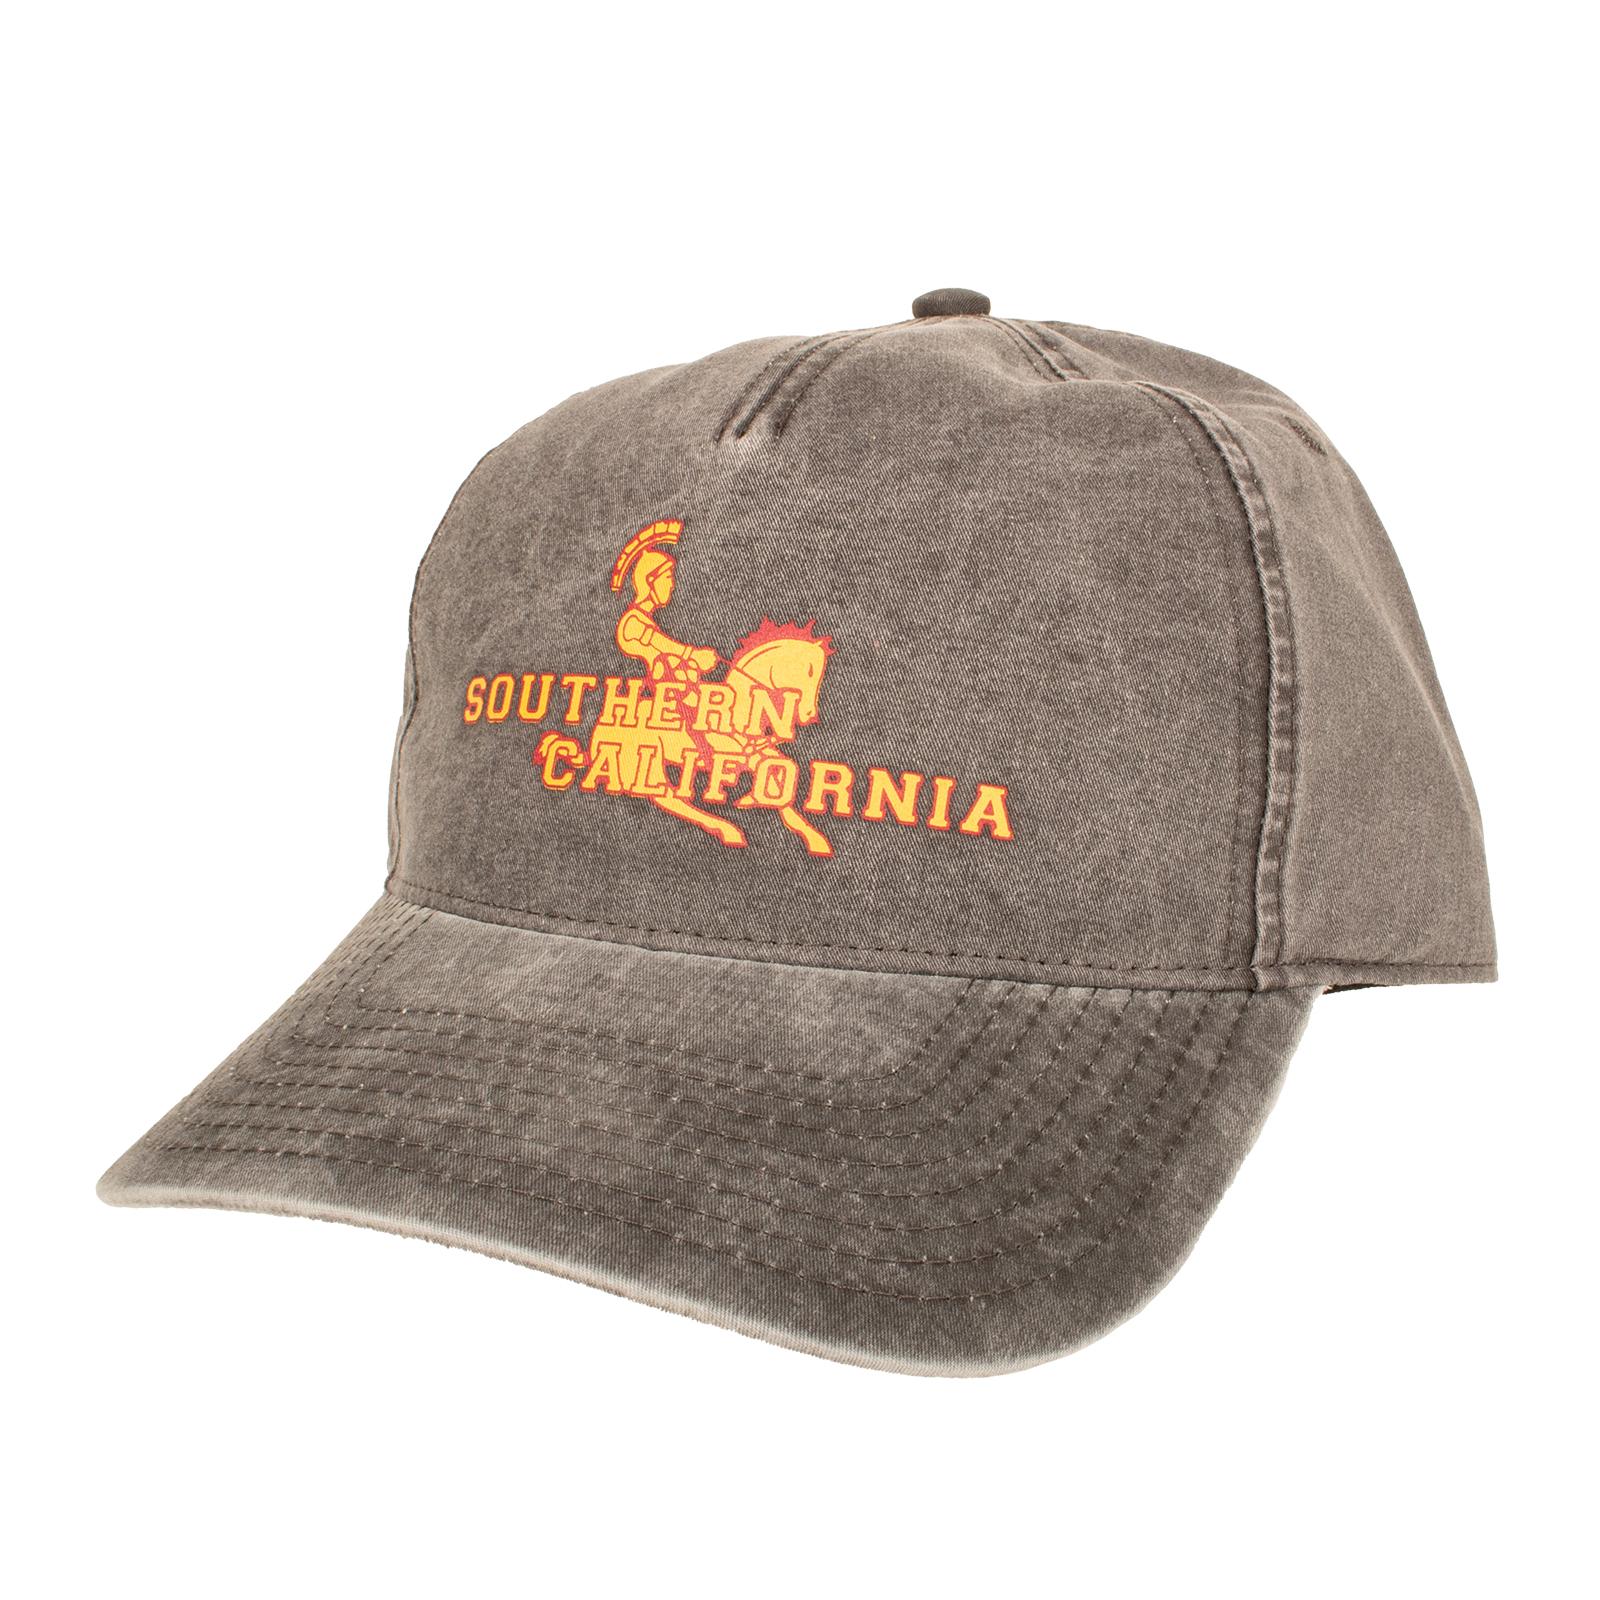 Southern California Unisex Trailhead Snap Back Hat Charcoal image01